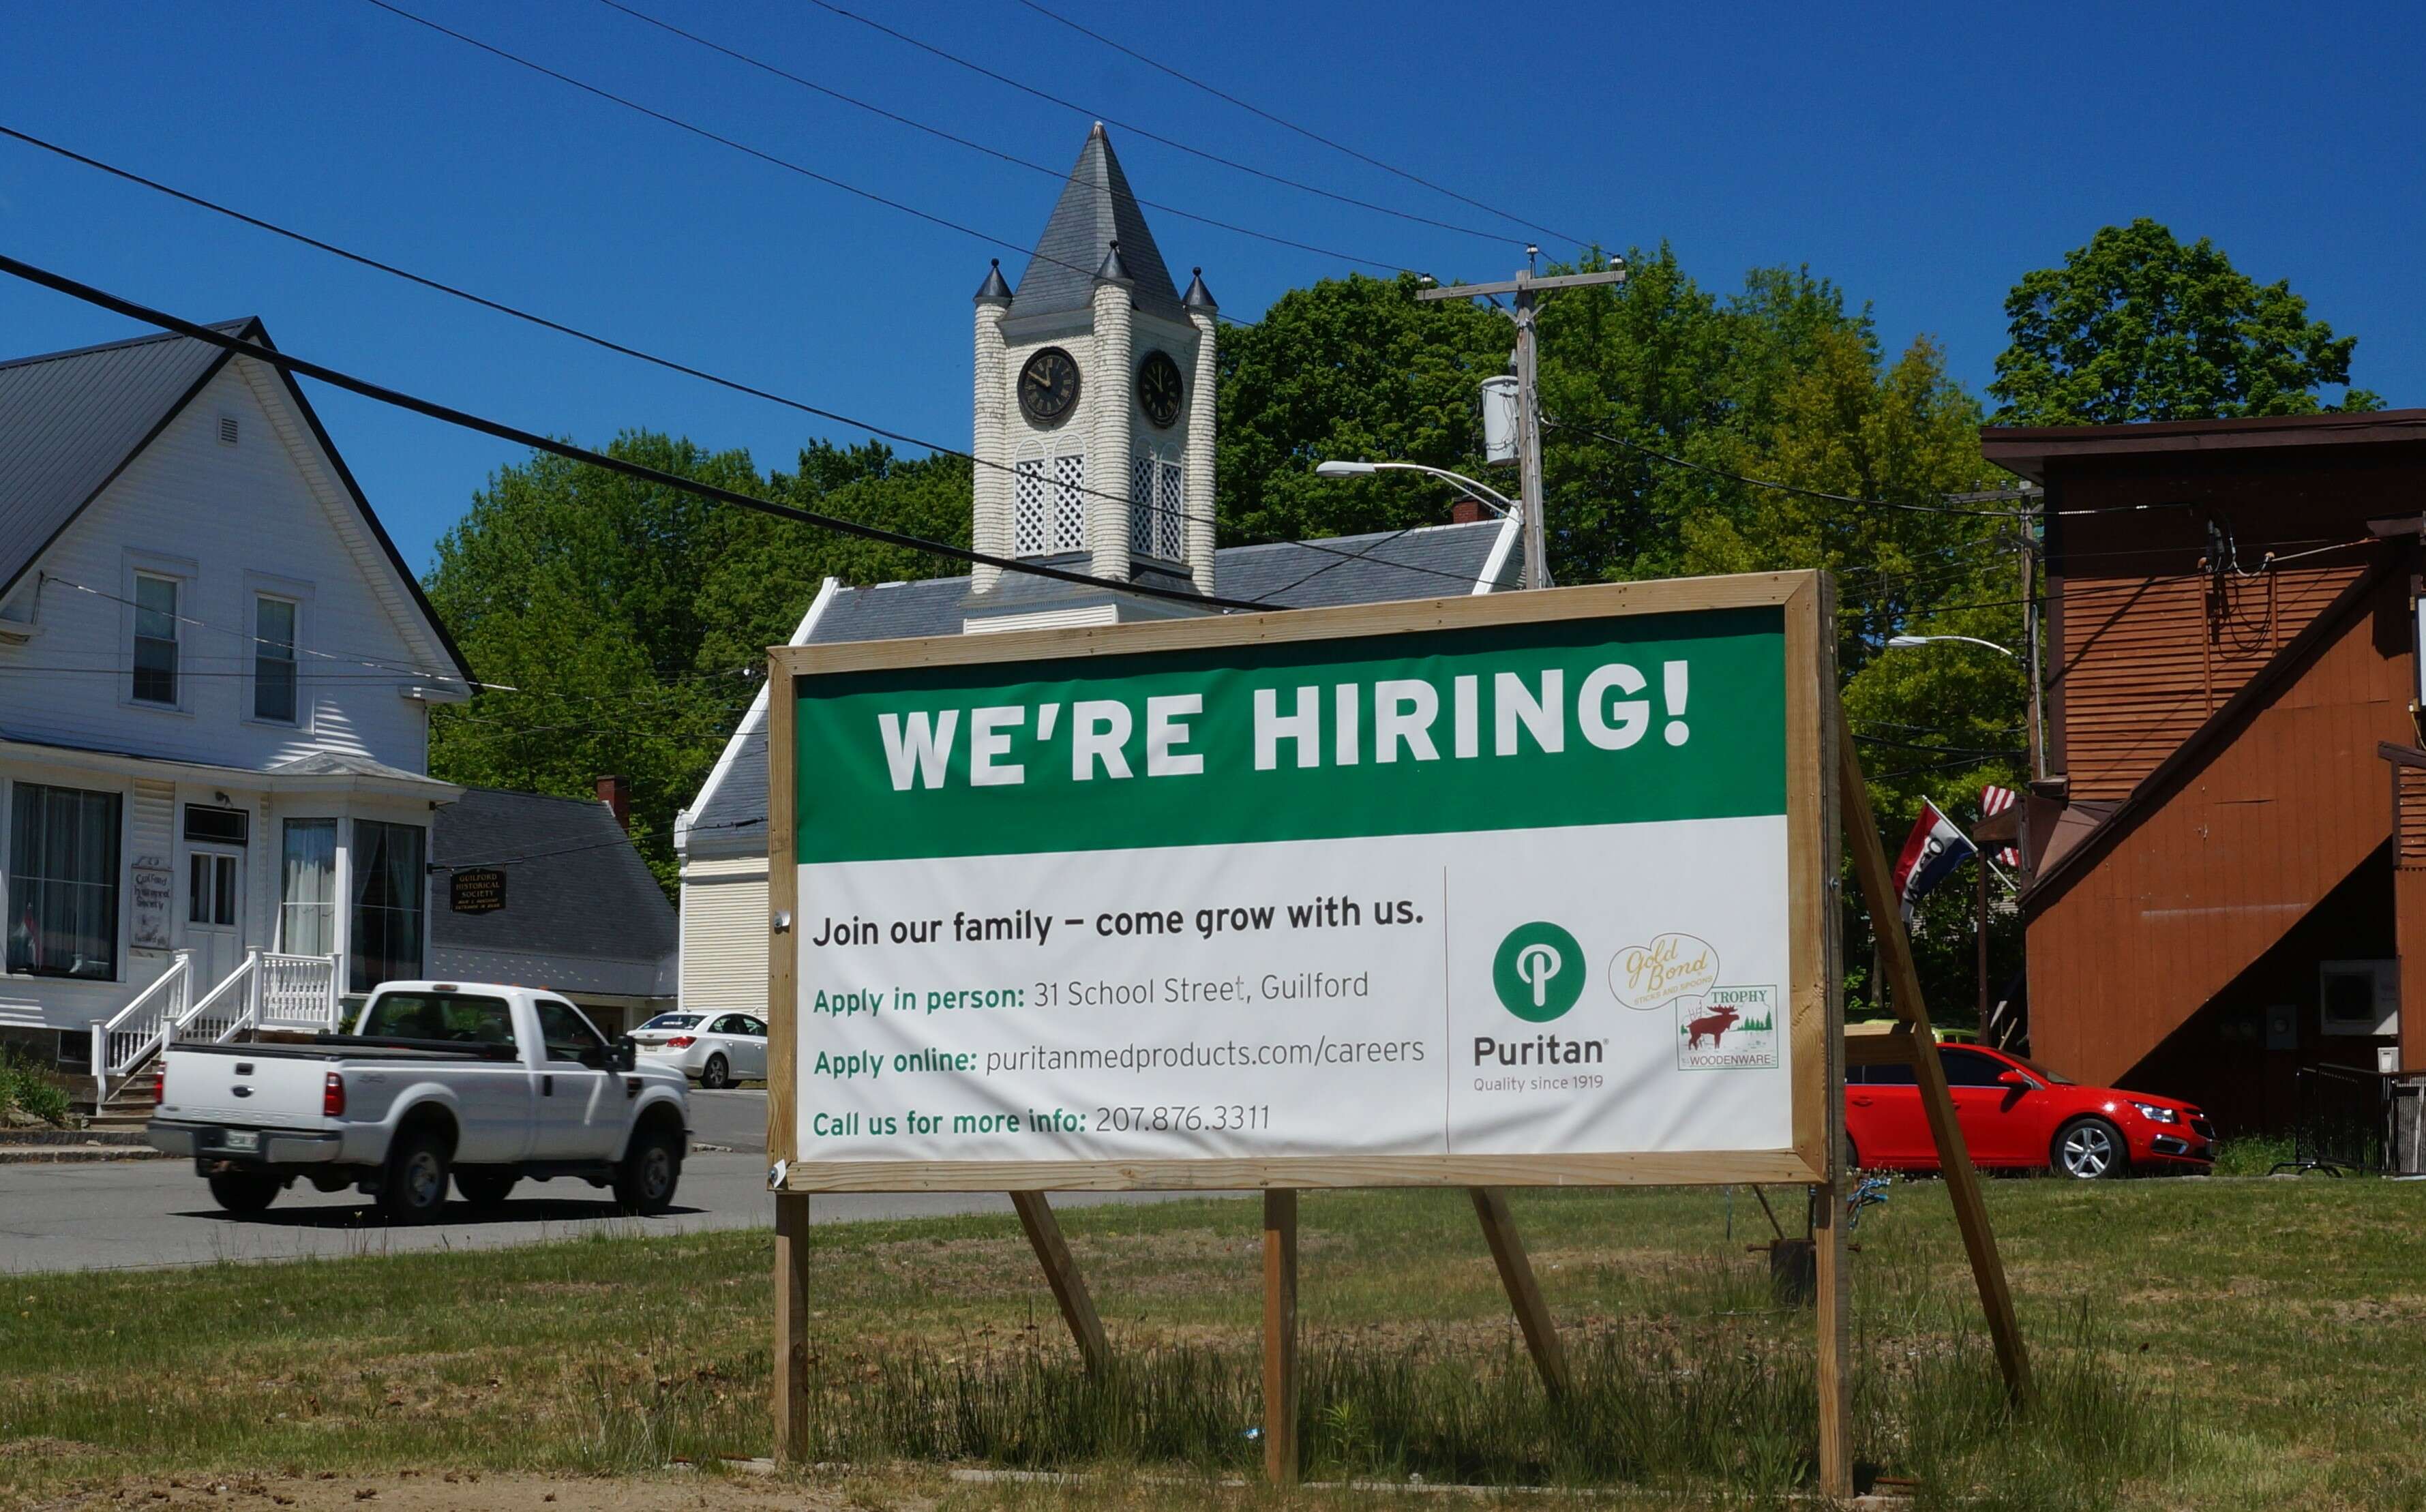 A sign that says we're hiring puritan medical products on a street with a wooden church and other small maine town buildings